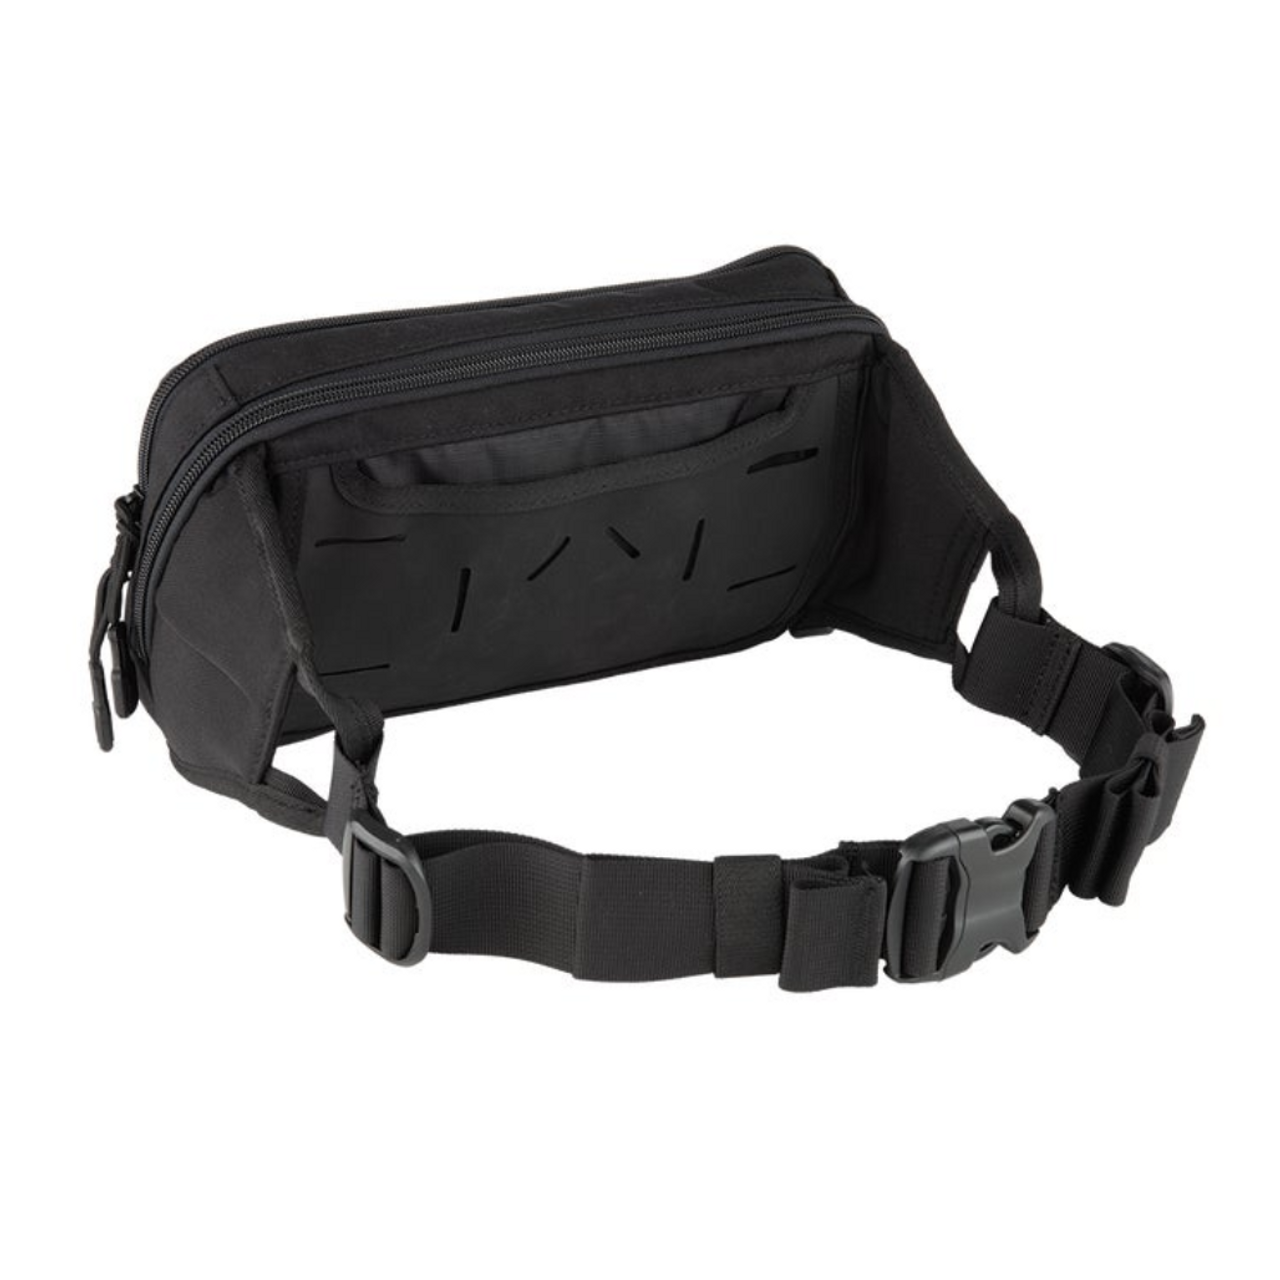 SOCP Tactical Fanny Pack | Conceal your Everyday Carry